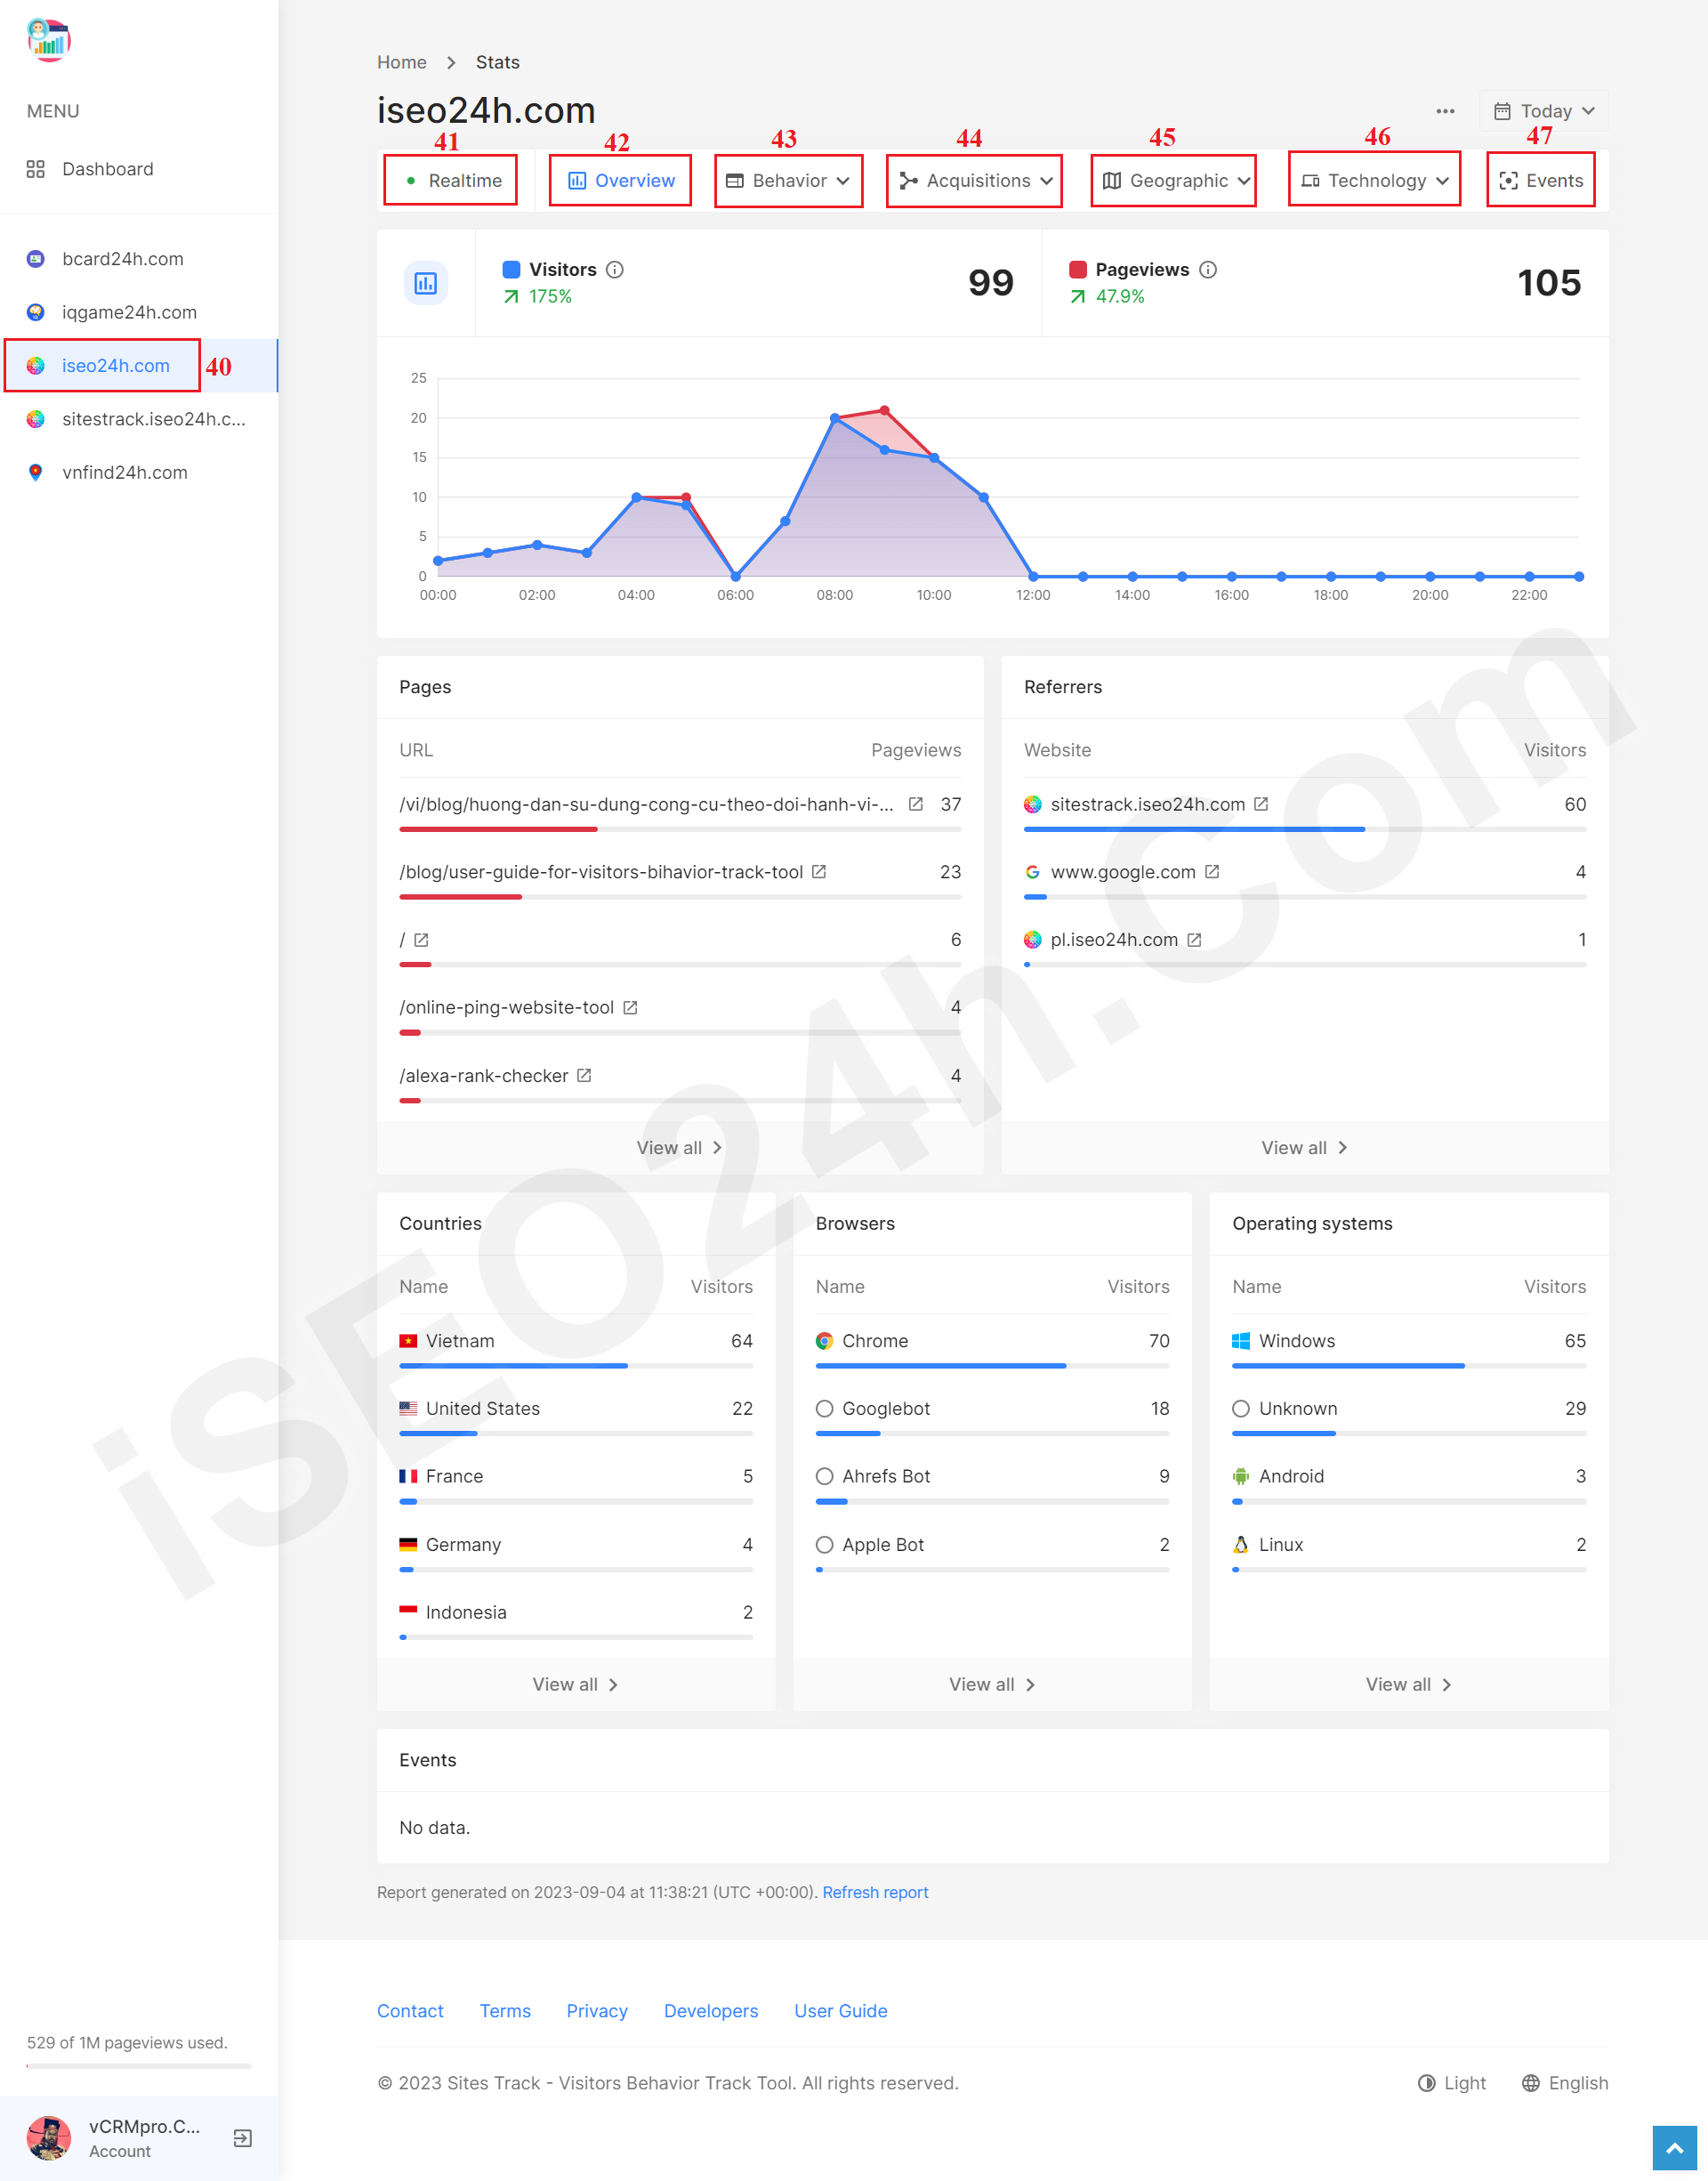 How to see the result of track of your websites and visitors behavior?